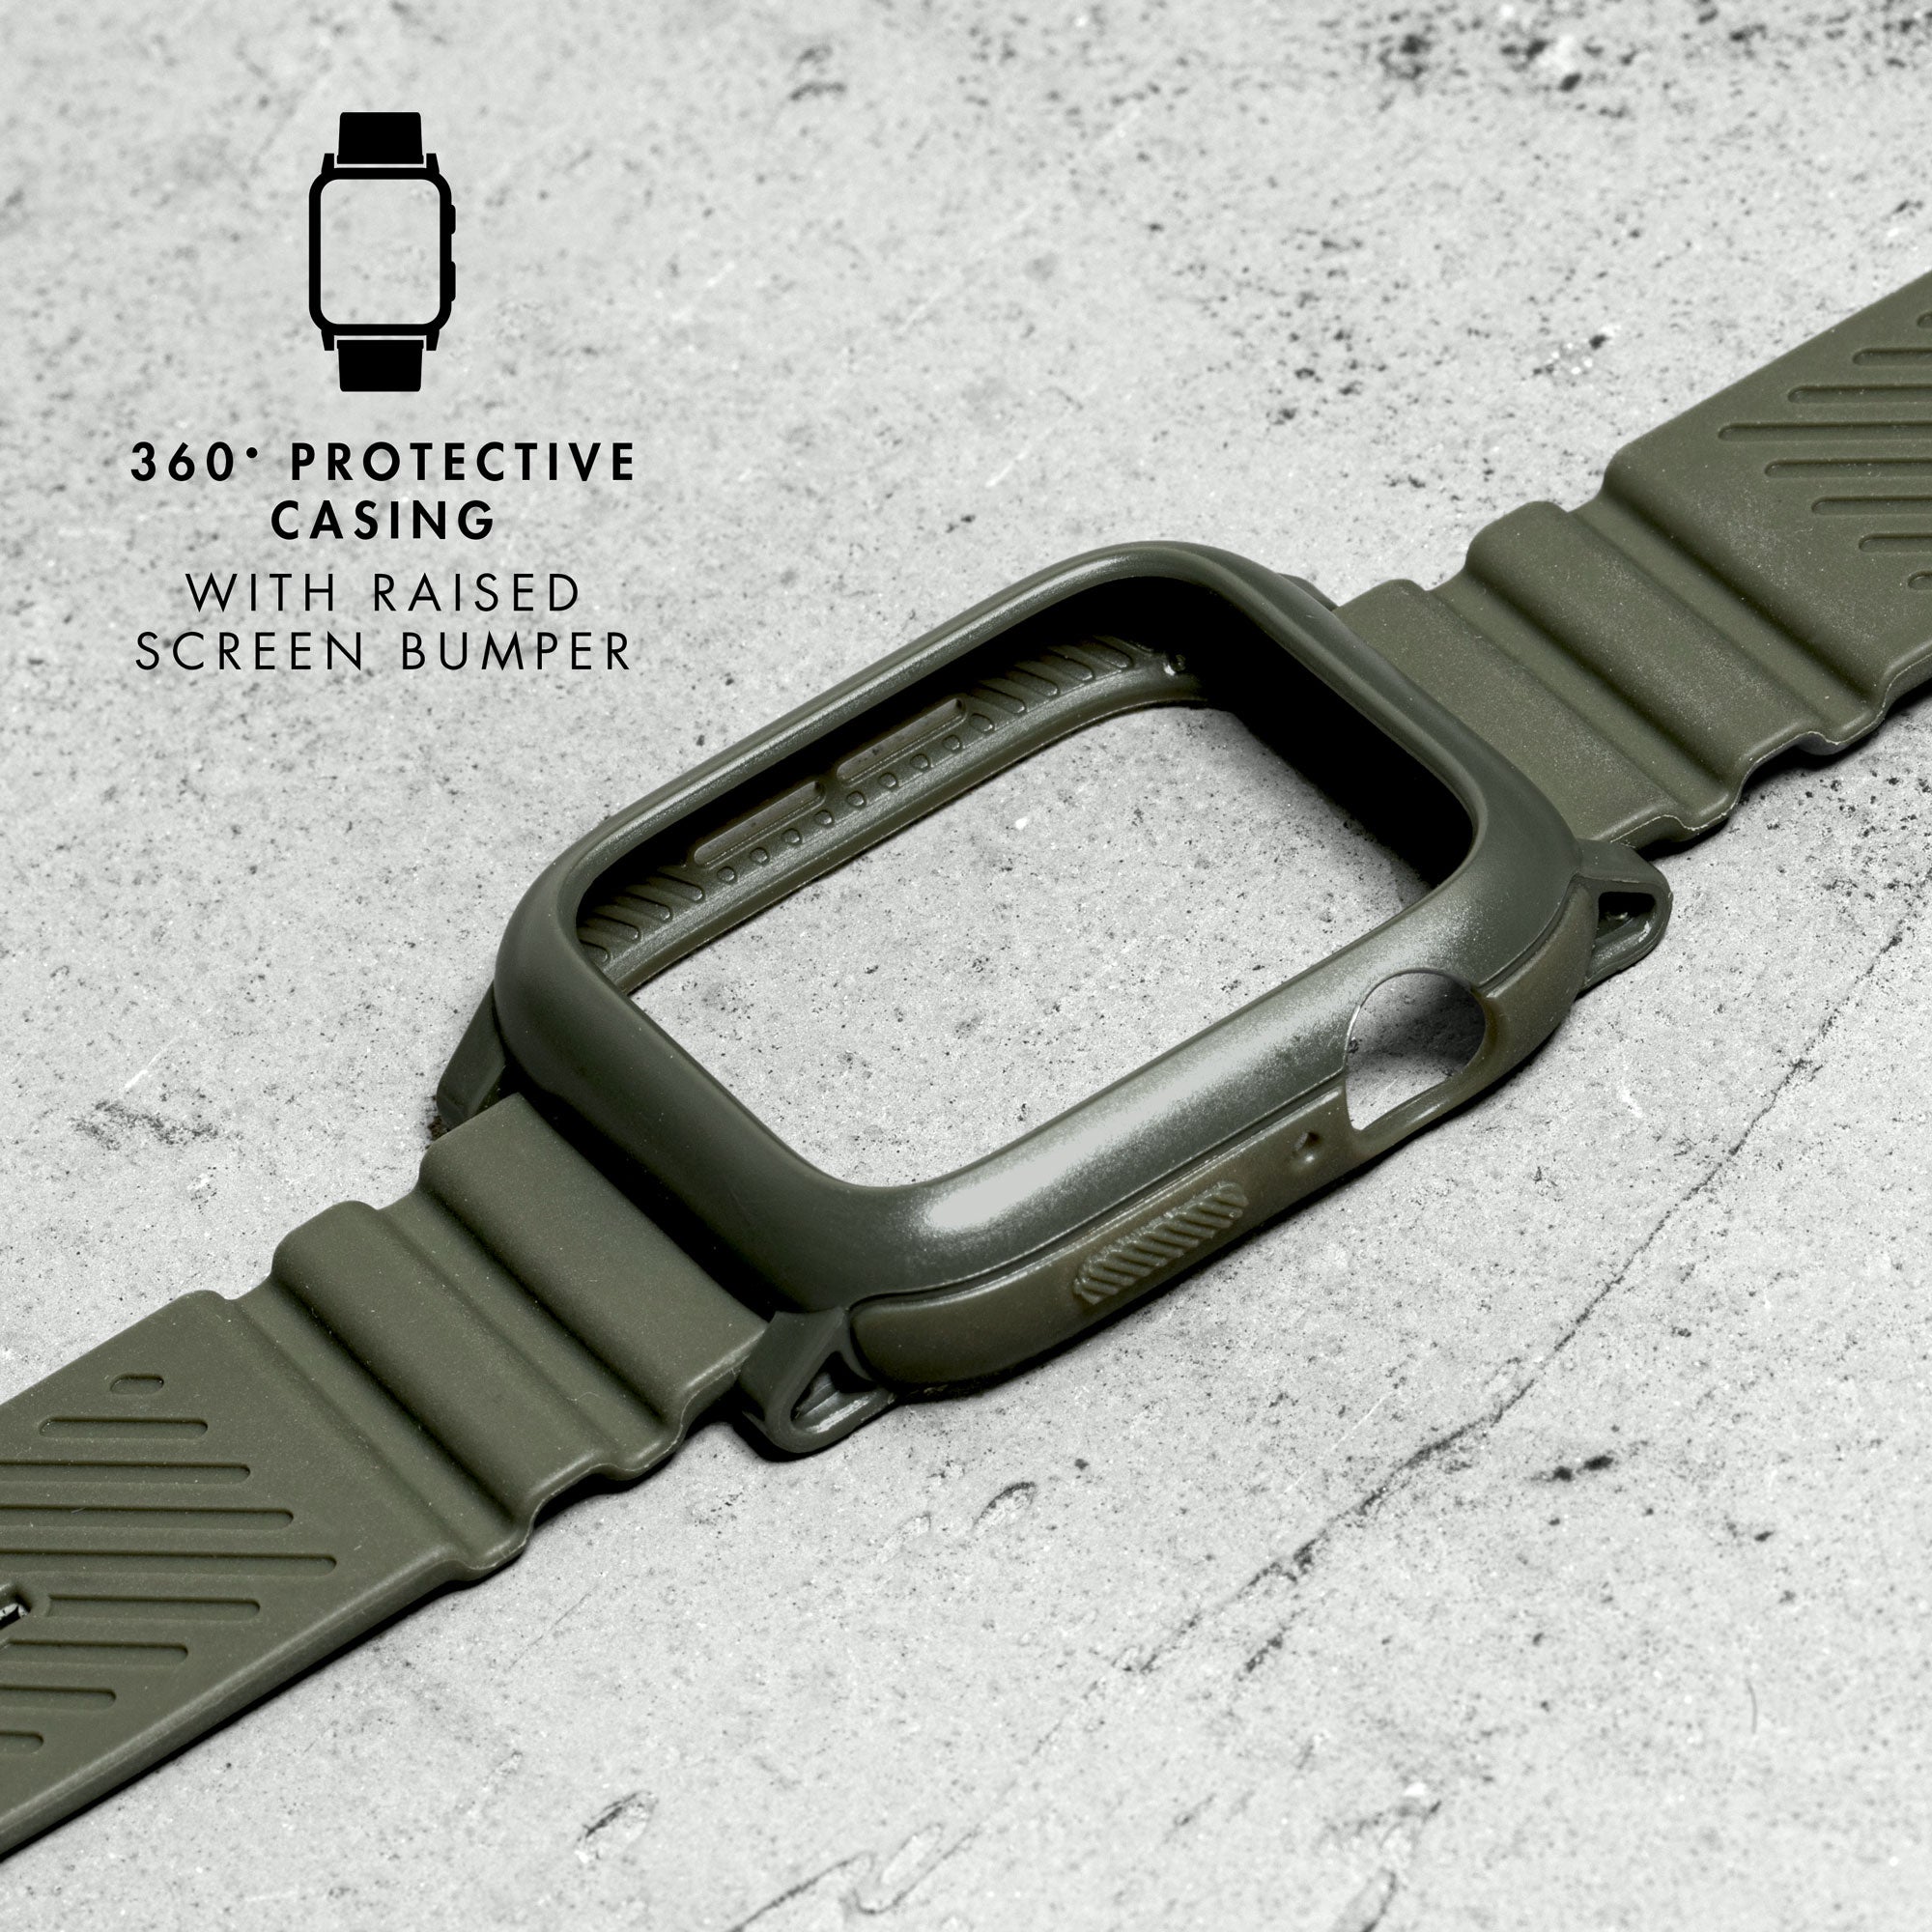 LAUT AW IMPKT Watch Strap for Apple Watch - 360° Protective Casing